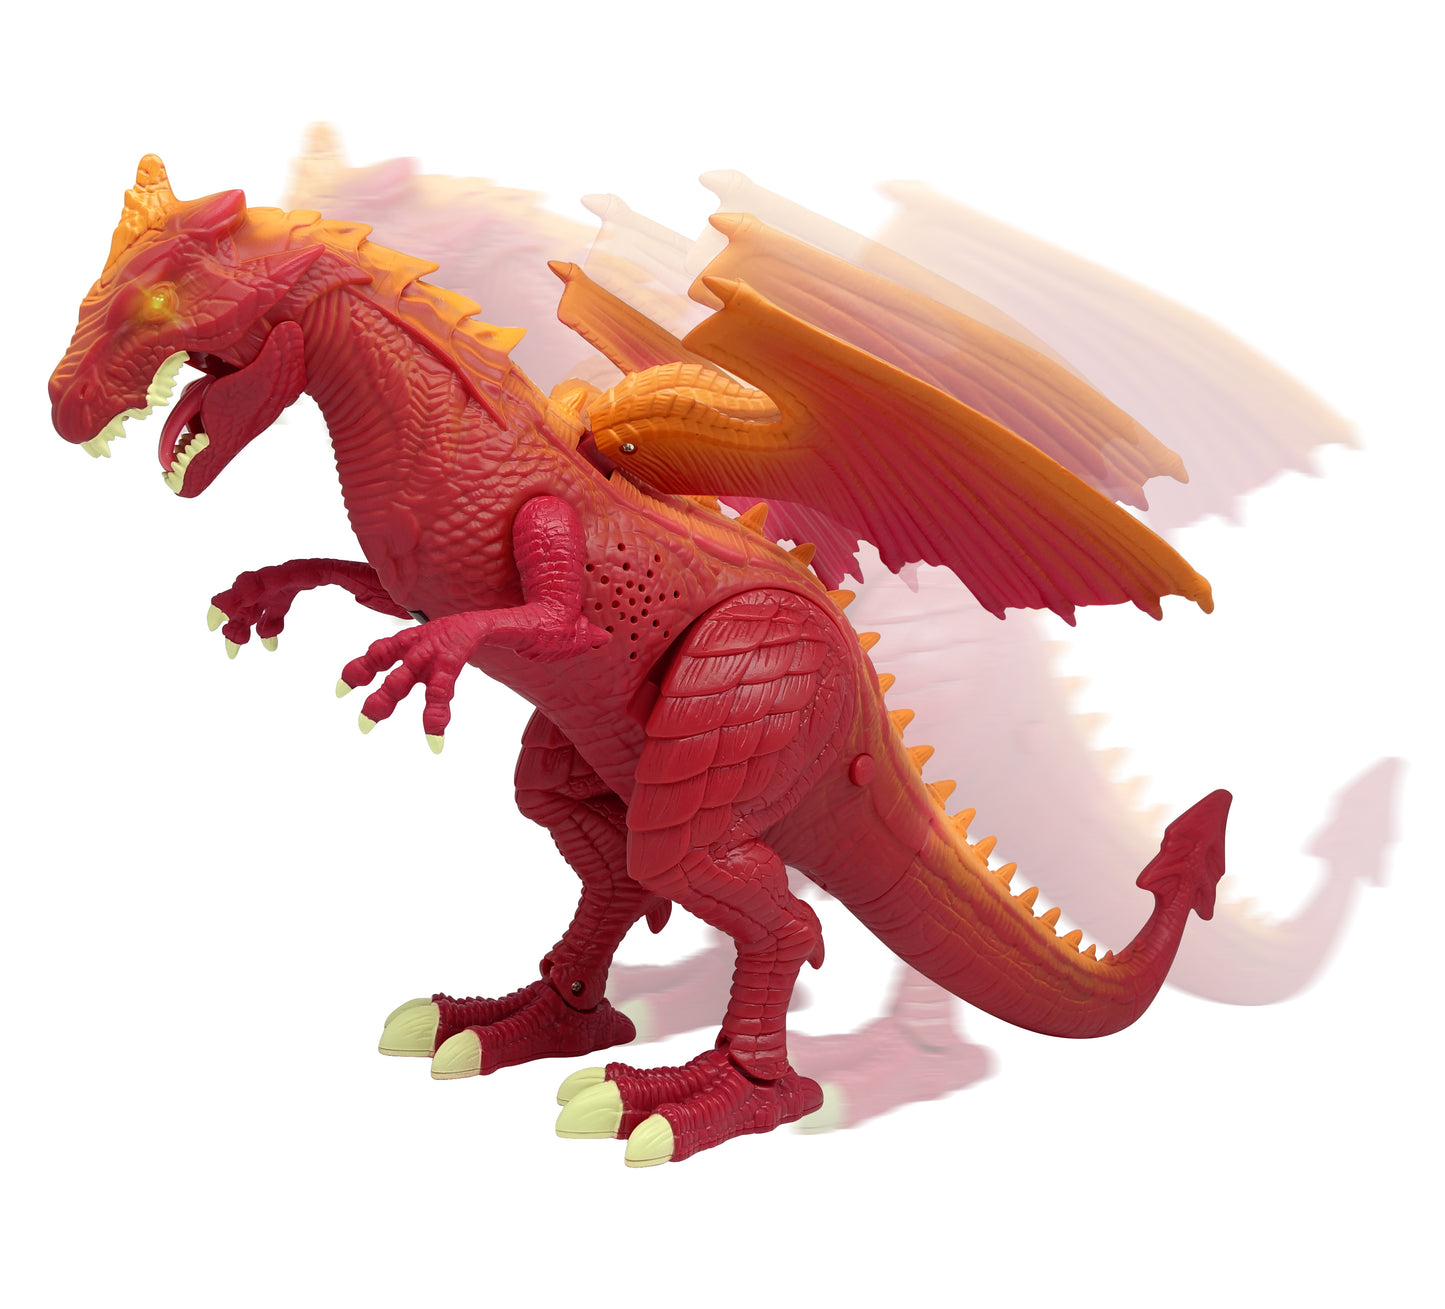 Mighty Megasaur Remote Controlled Dragon Toy - Roars and Walks